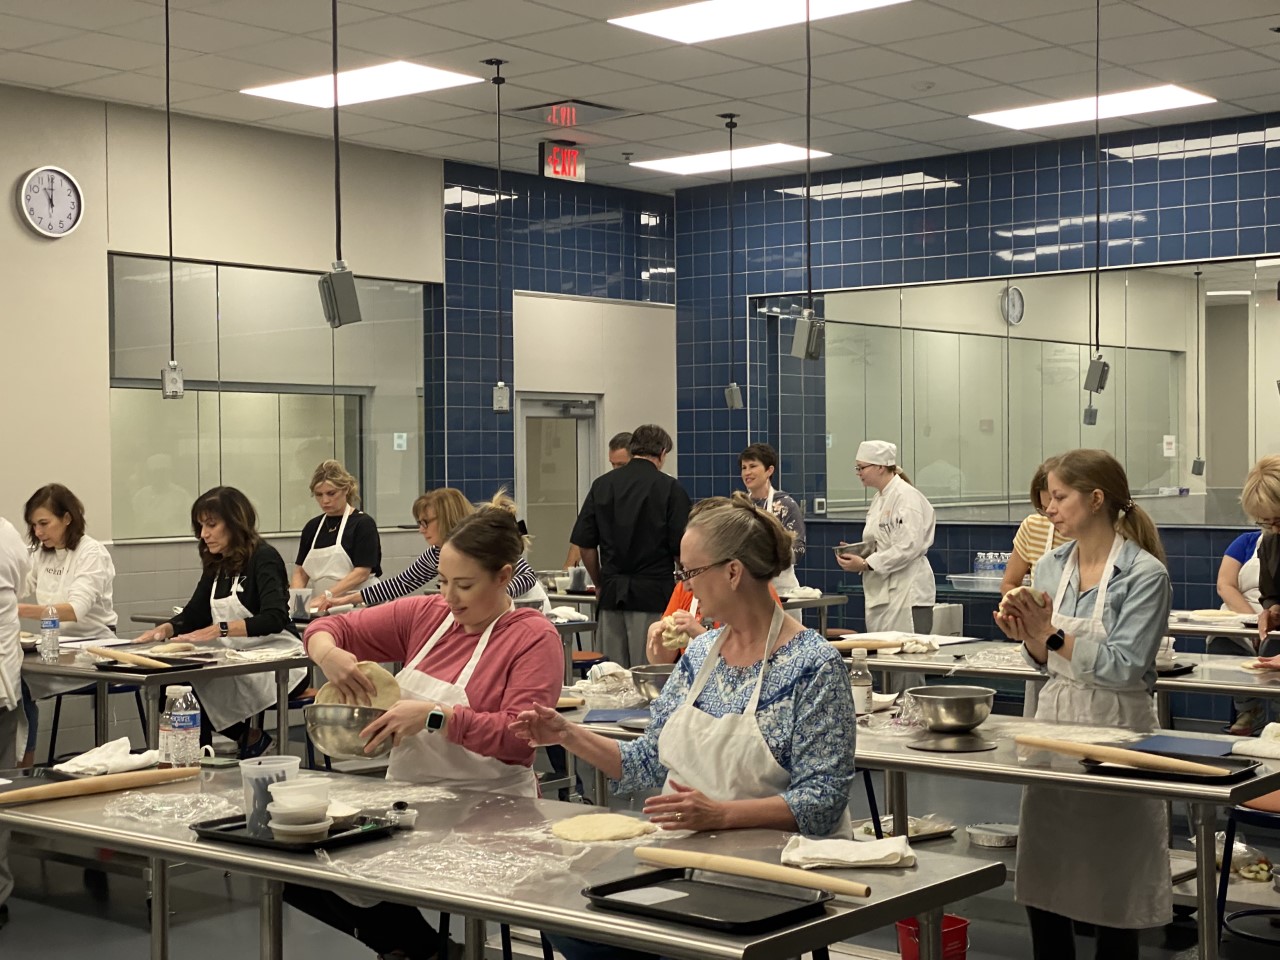 Community Culinary classes deliver crash course in cuisine